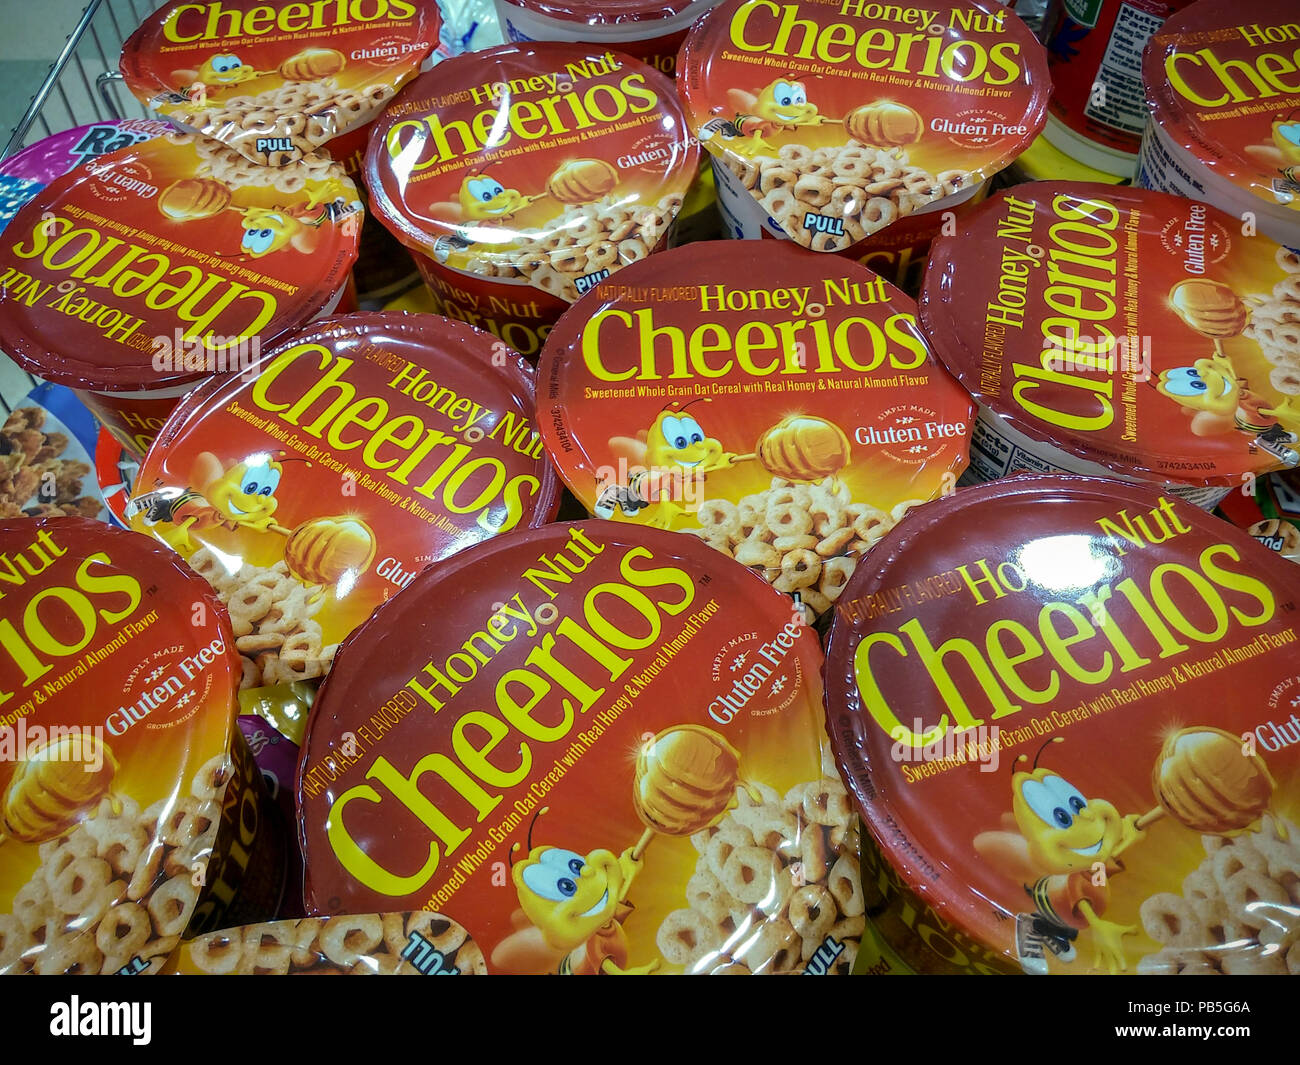 Single-serving containers of General Mills' Cheerios breakfast cereal in a supermarket in New York on Tuesday, July 24, 2018. (Â© Richard B. Levine) Stock Photo